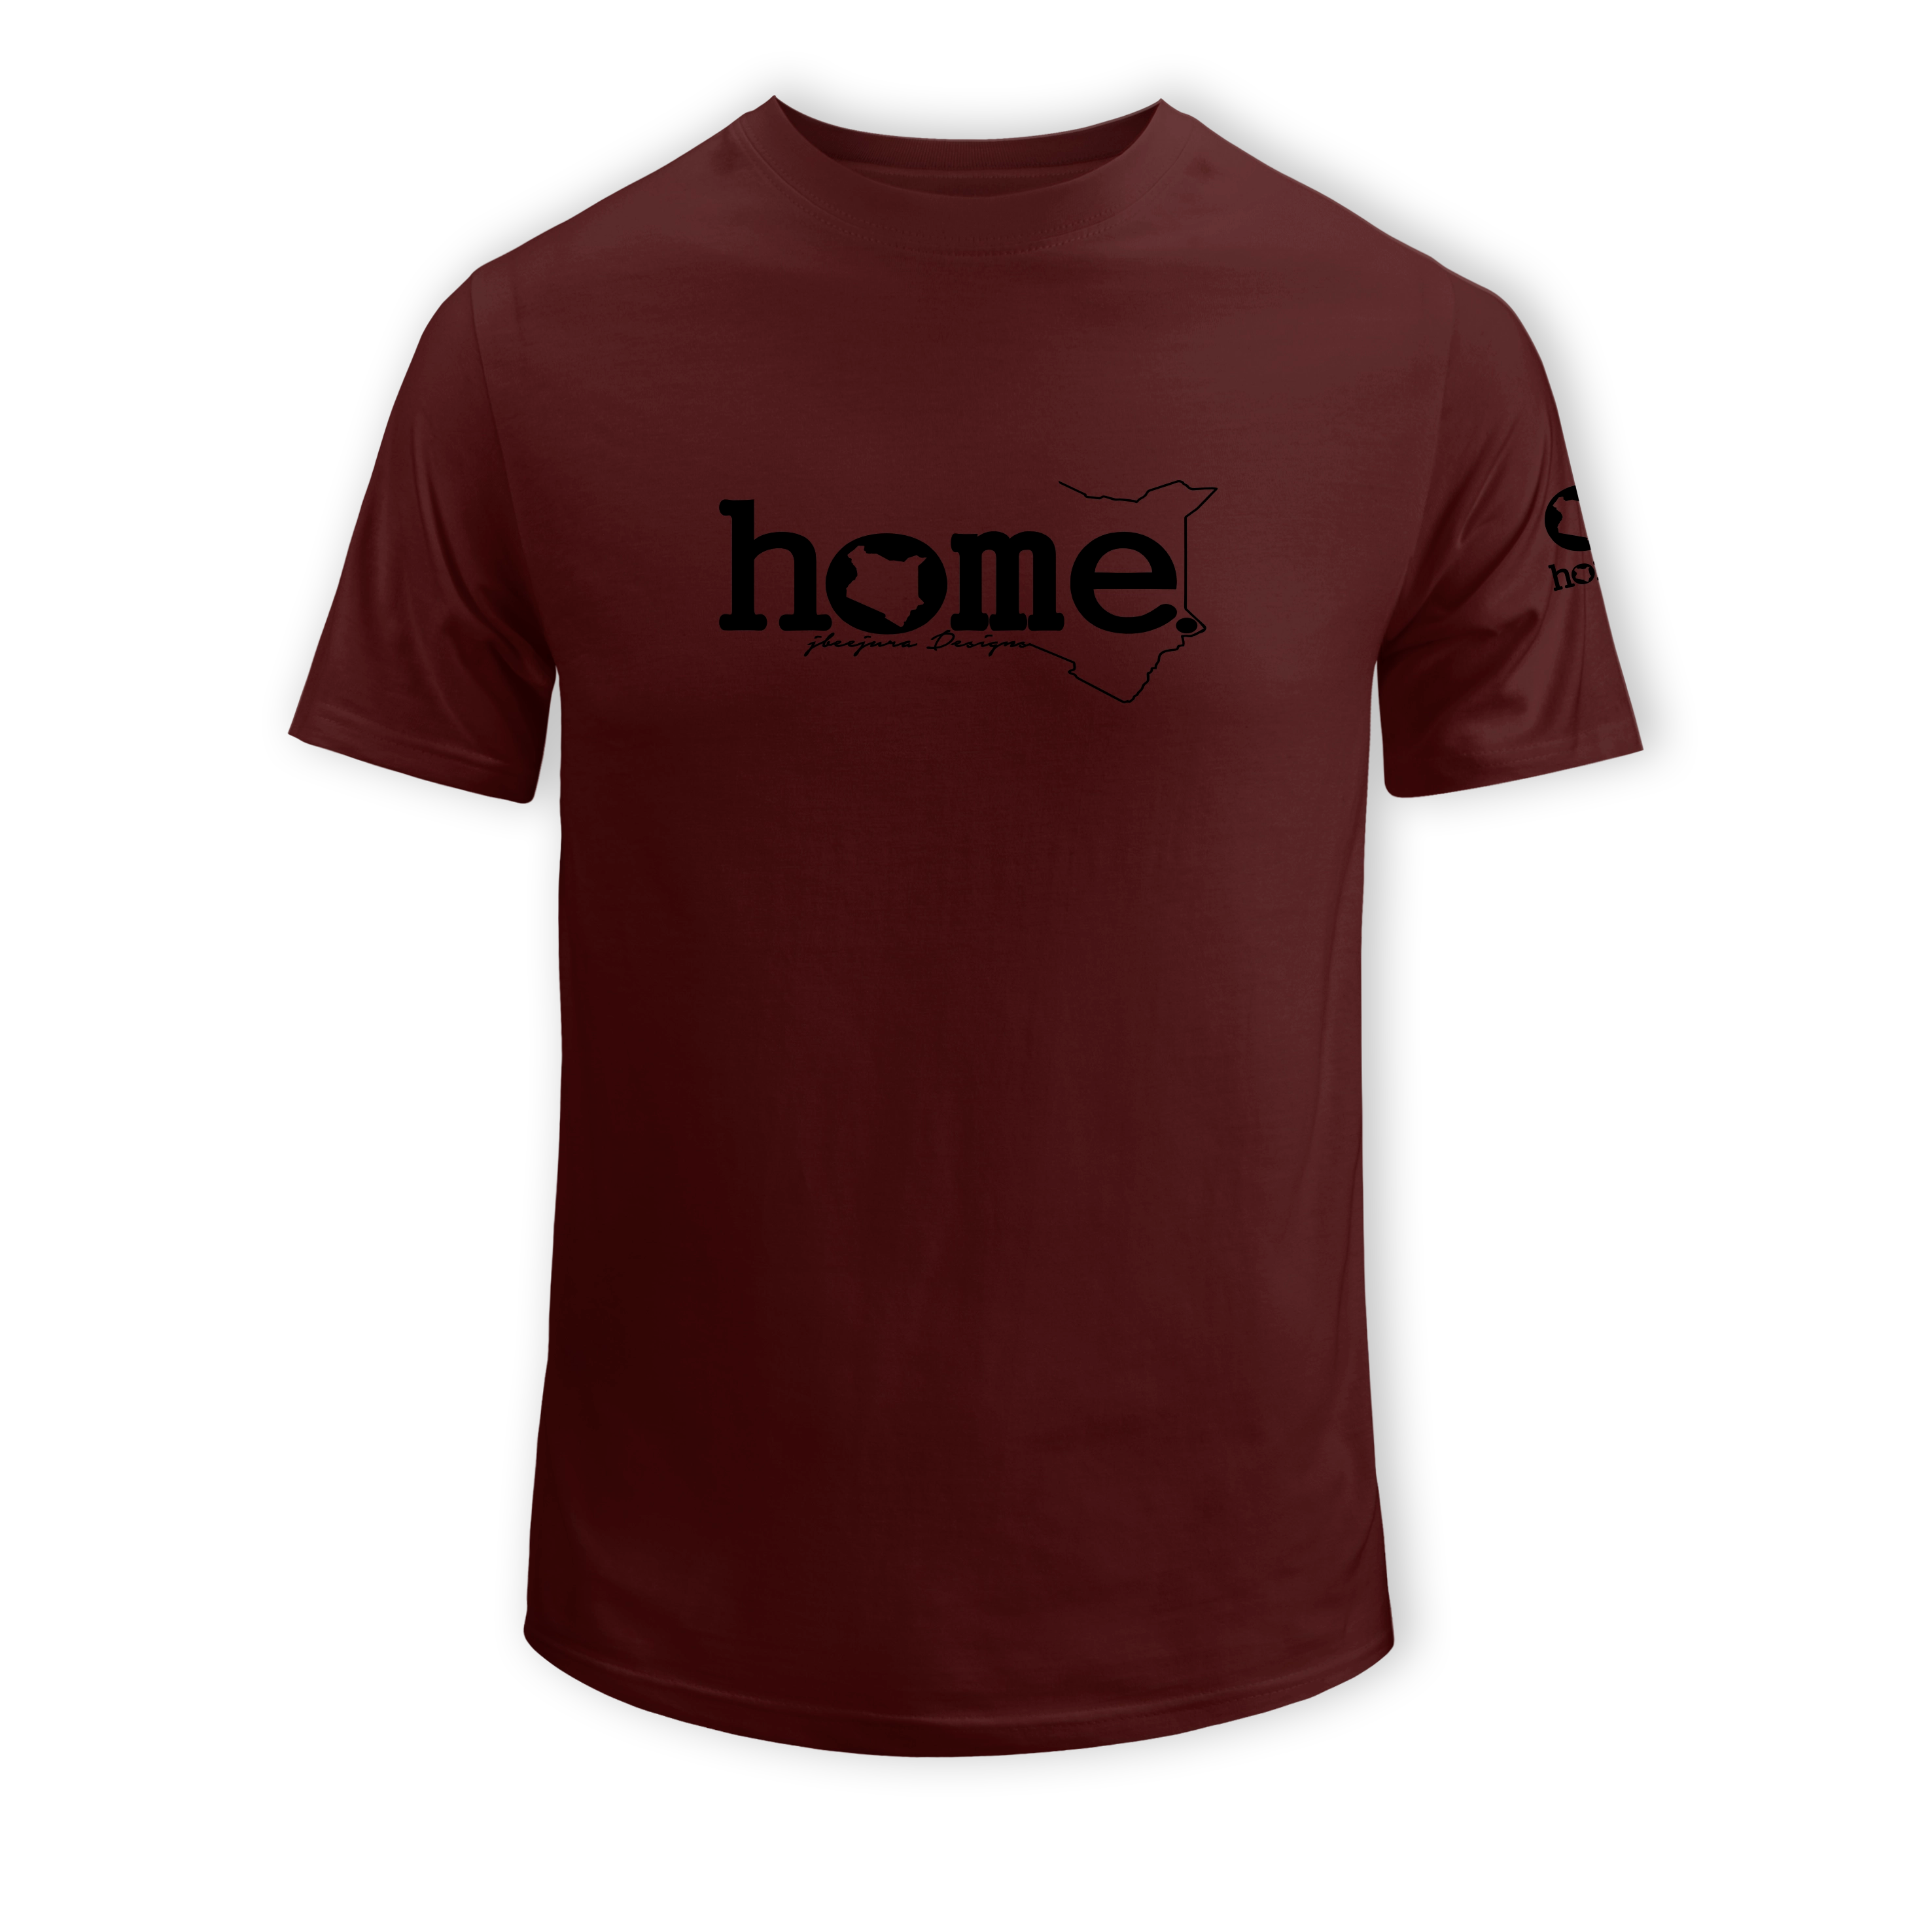 home_254 KIDS SHORT-SLEEVED MAROON T-SHIRT WITH A BLACK CLASSIC WORDS PRINT – COTTON PLUS FABRIC